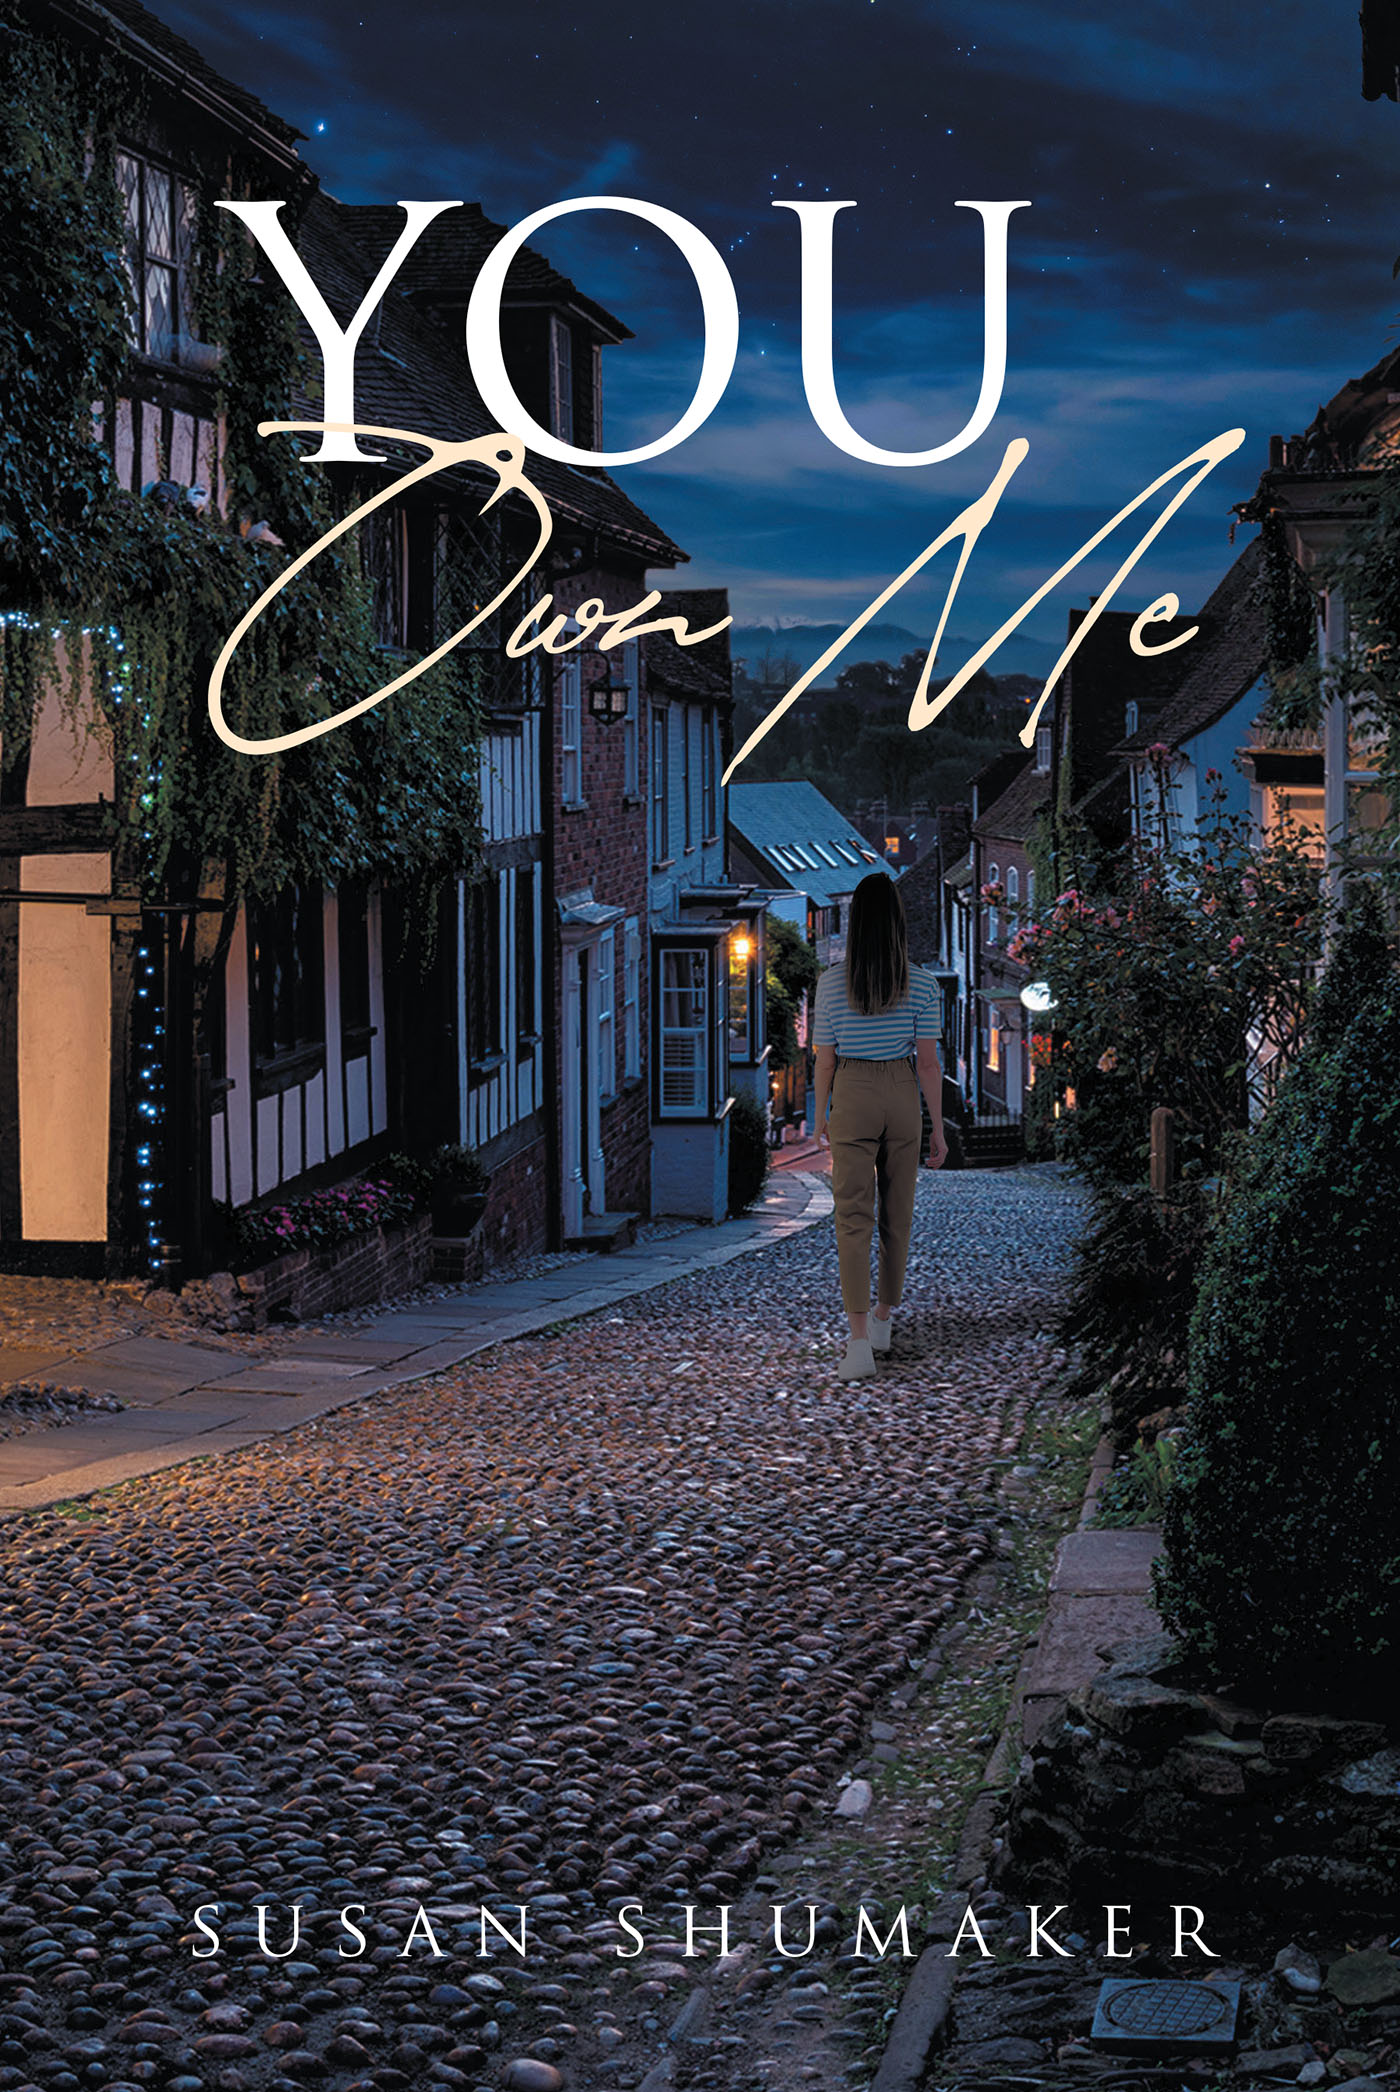 Author Susan Shumaker’s New Book, "You Own Me," Follows a Twenty-Four-Year-Old American Woman Running from a Traumatic Past and Starting Over in England